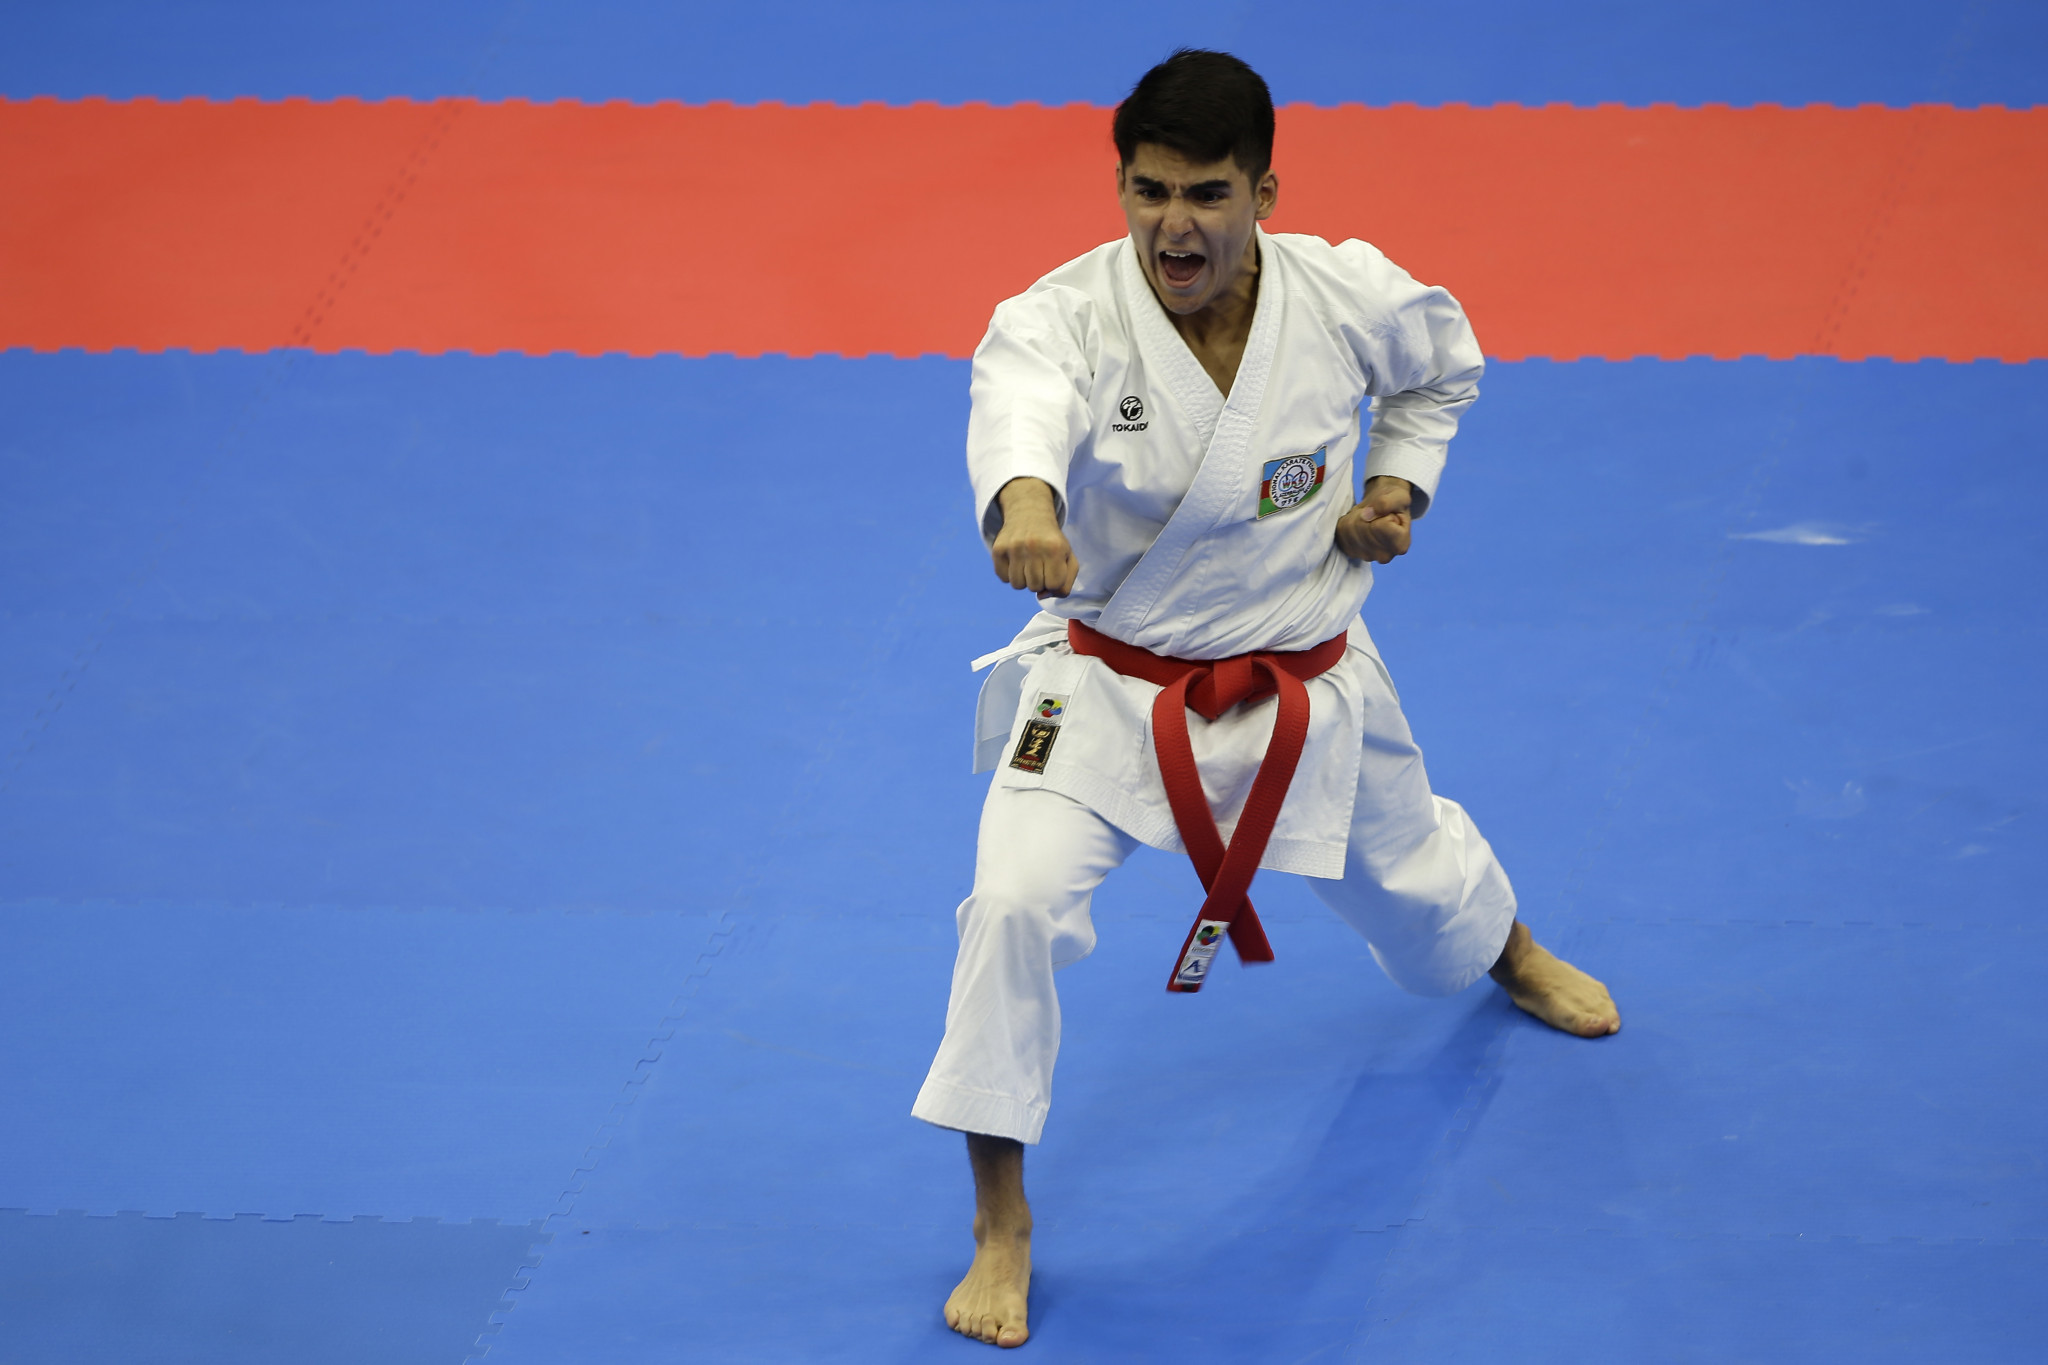 A project to modify kata rules has been ongoing ©Getty Images